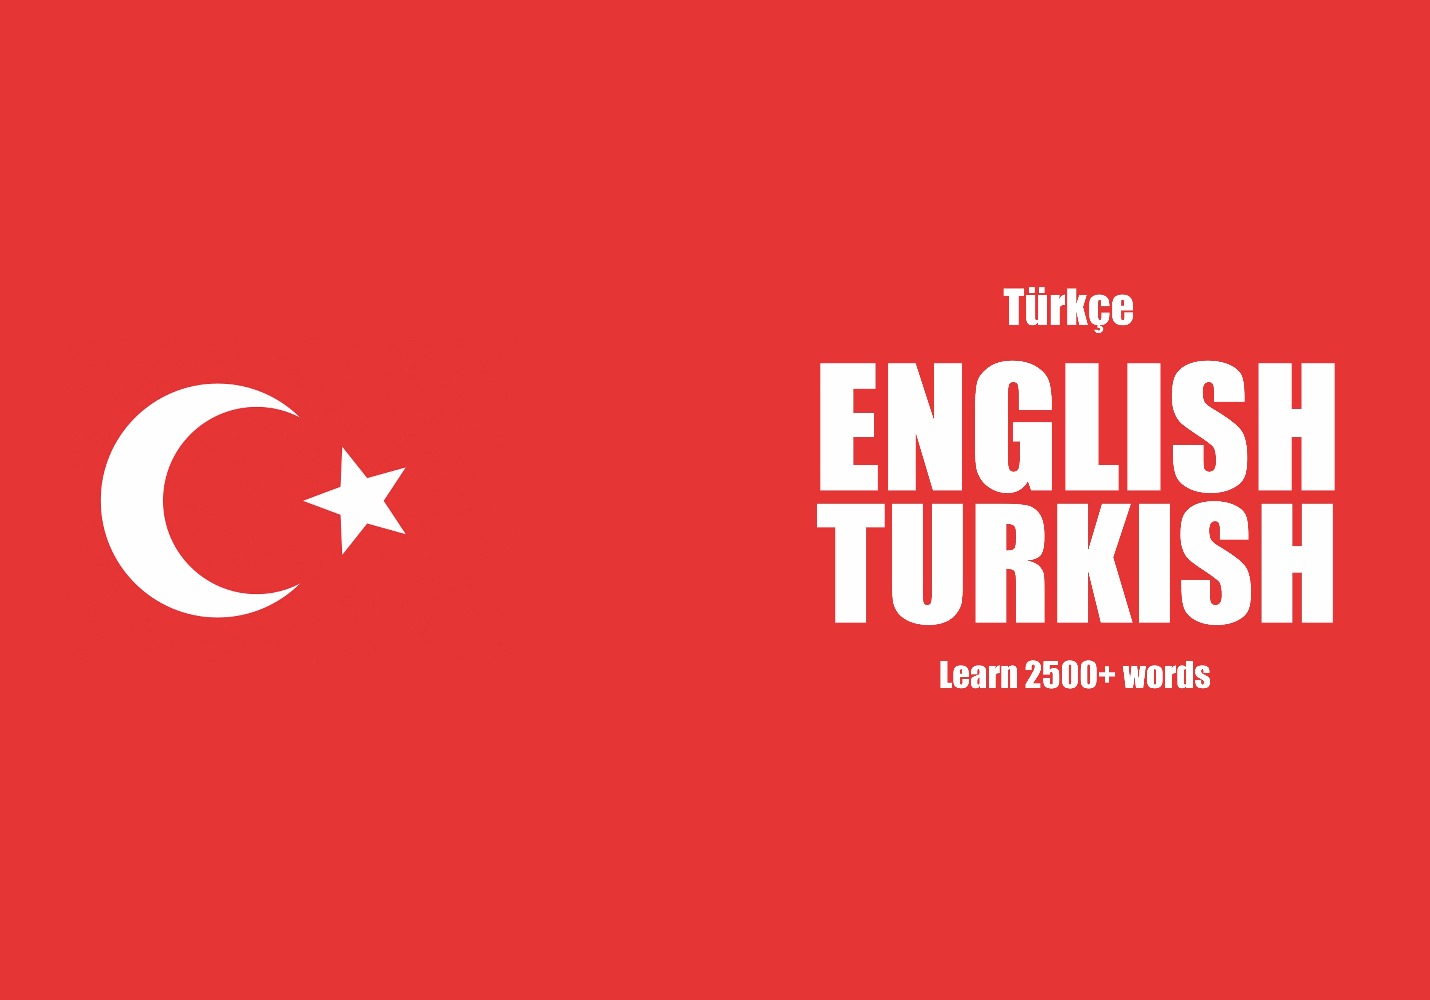 Turkish language learning notebook cover